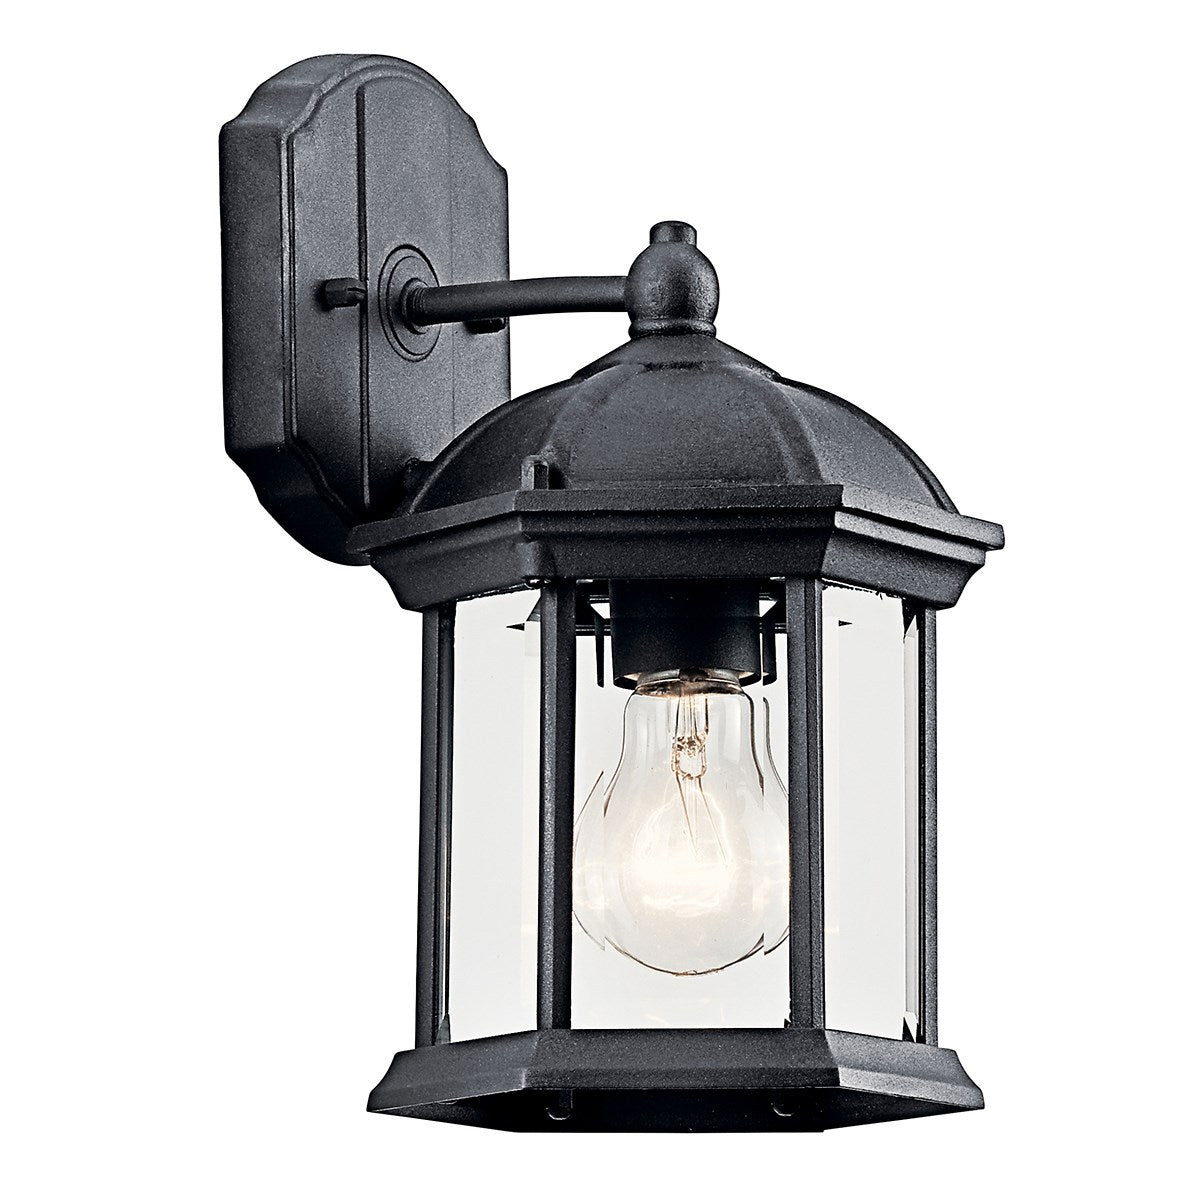 Kichler Canada - LED Outdoor Wall Mount - Barrie - Black- Union Lighting Luminaires Decor